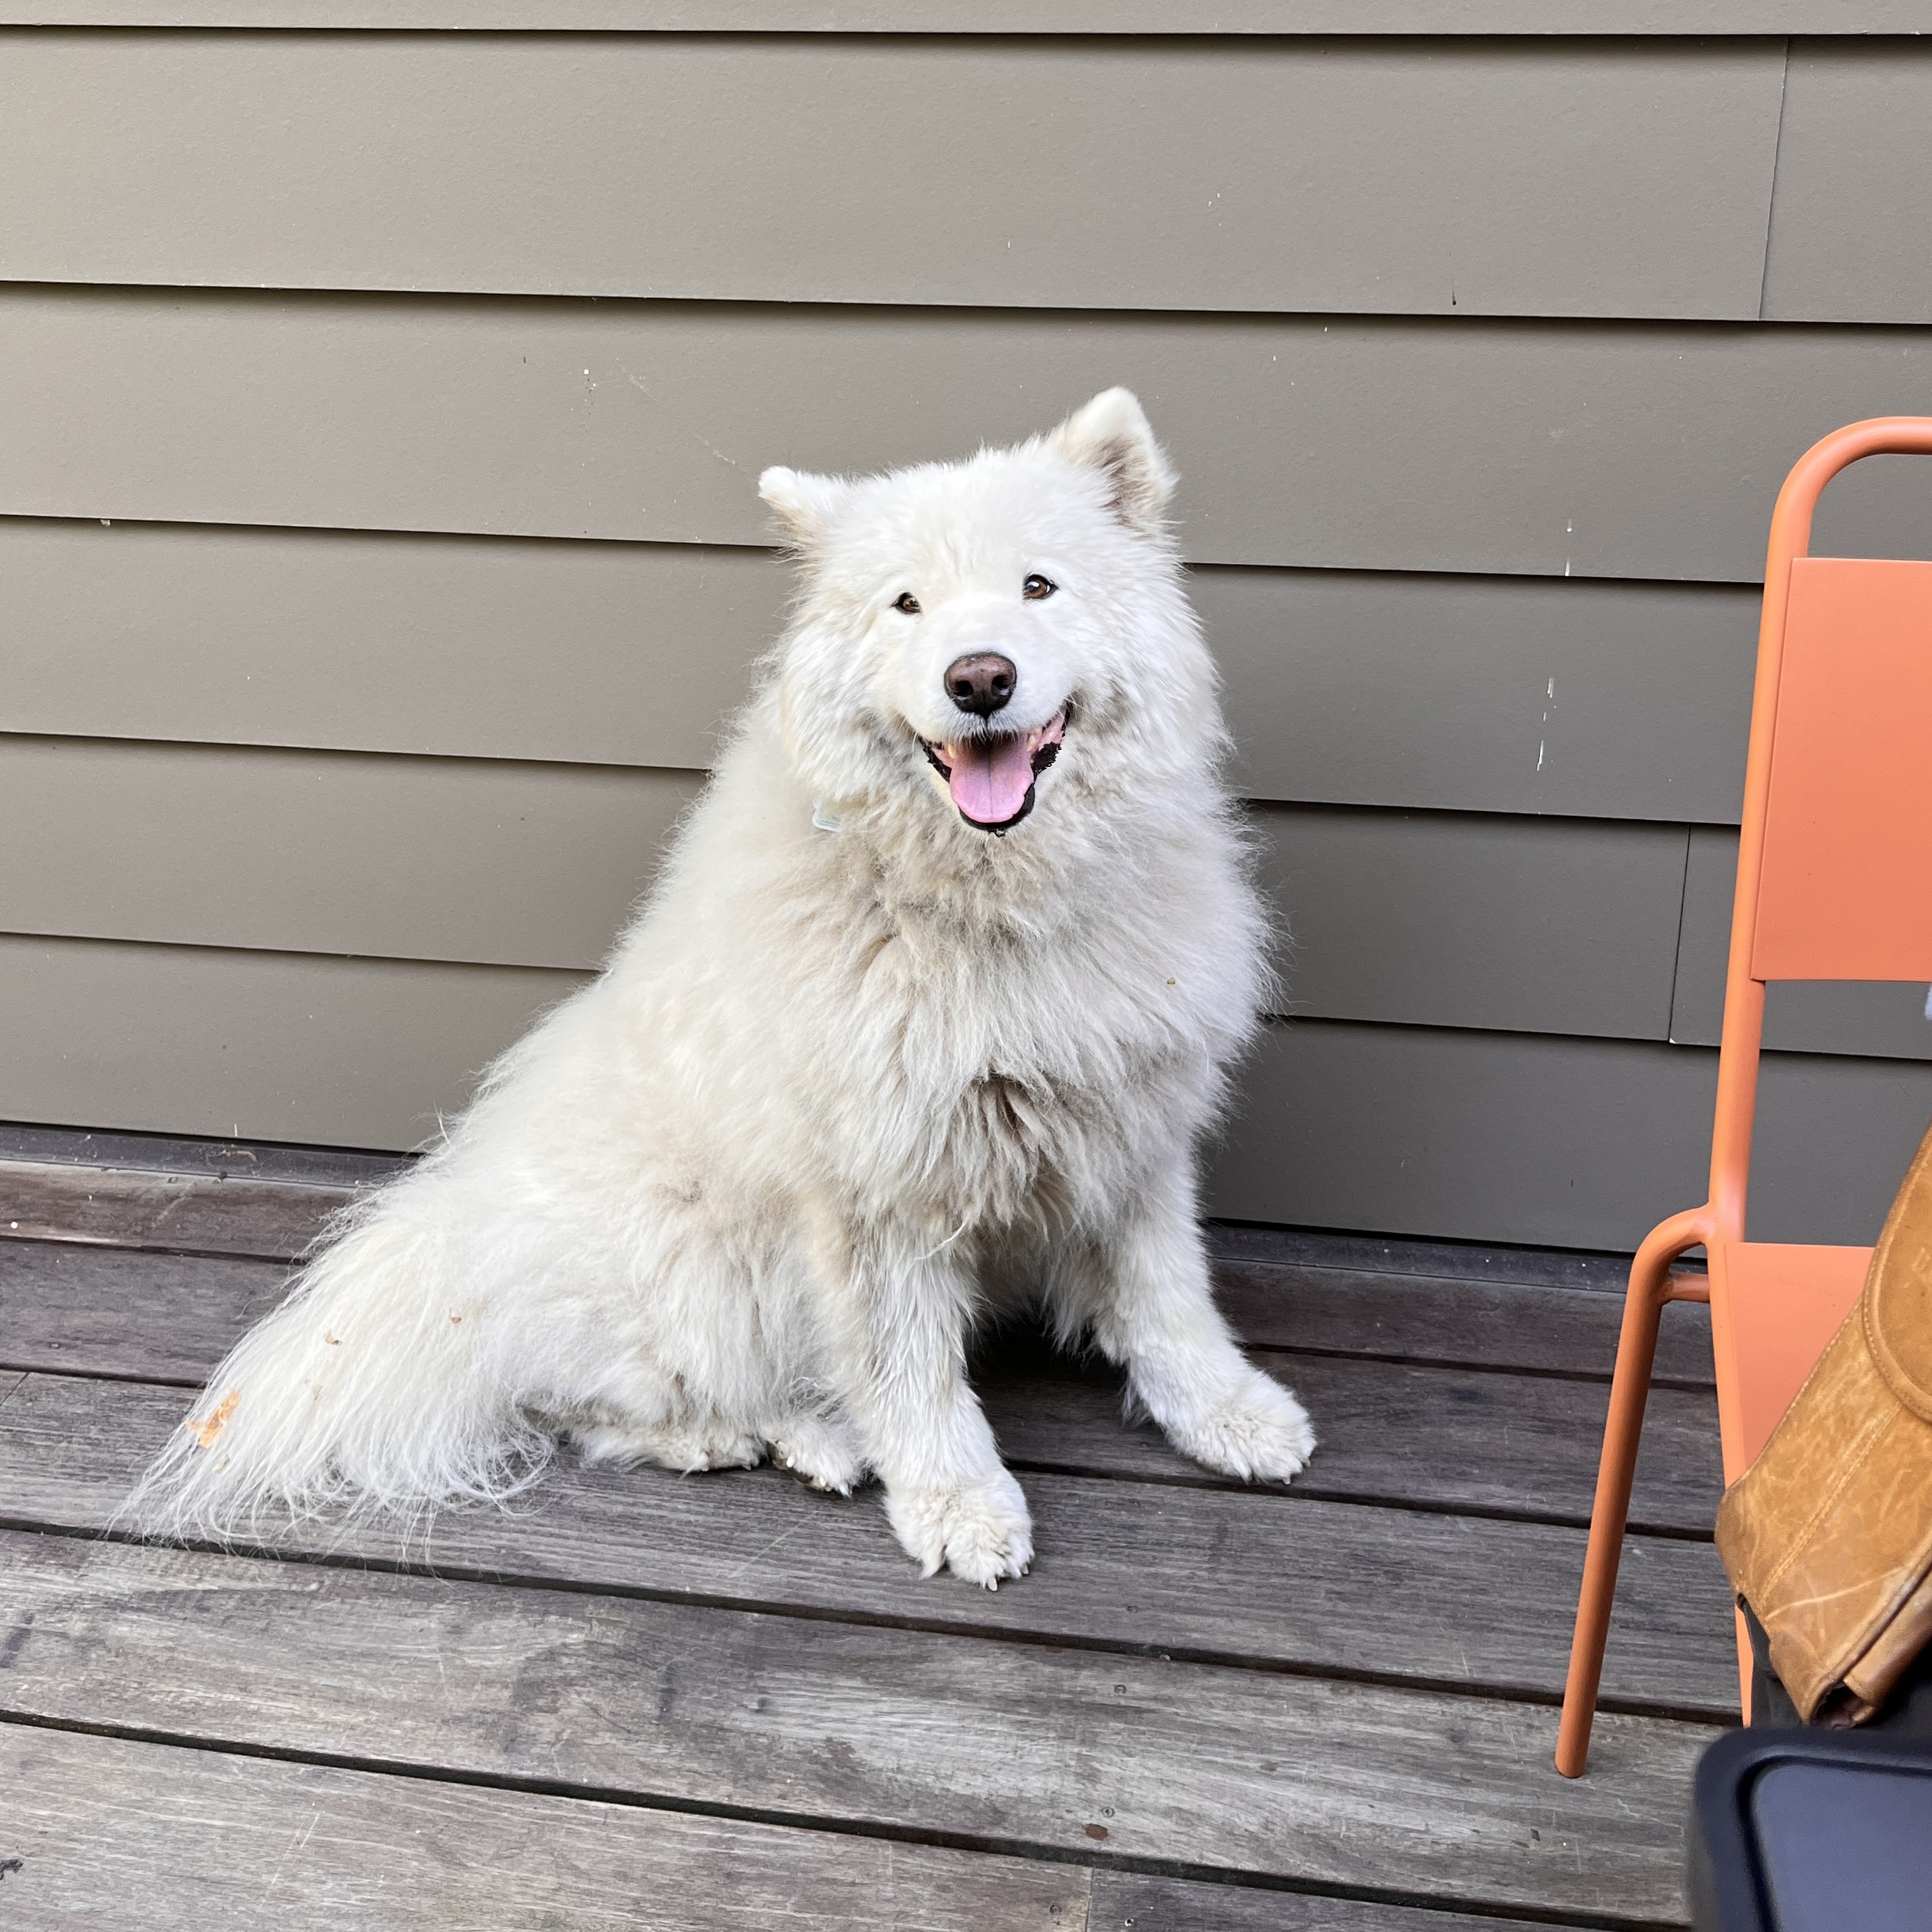 A very dirty and scruffy looking Samoyed sitting on an outdoor deck and smiling at the viewer